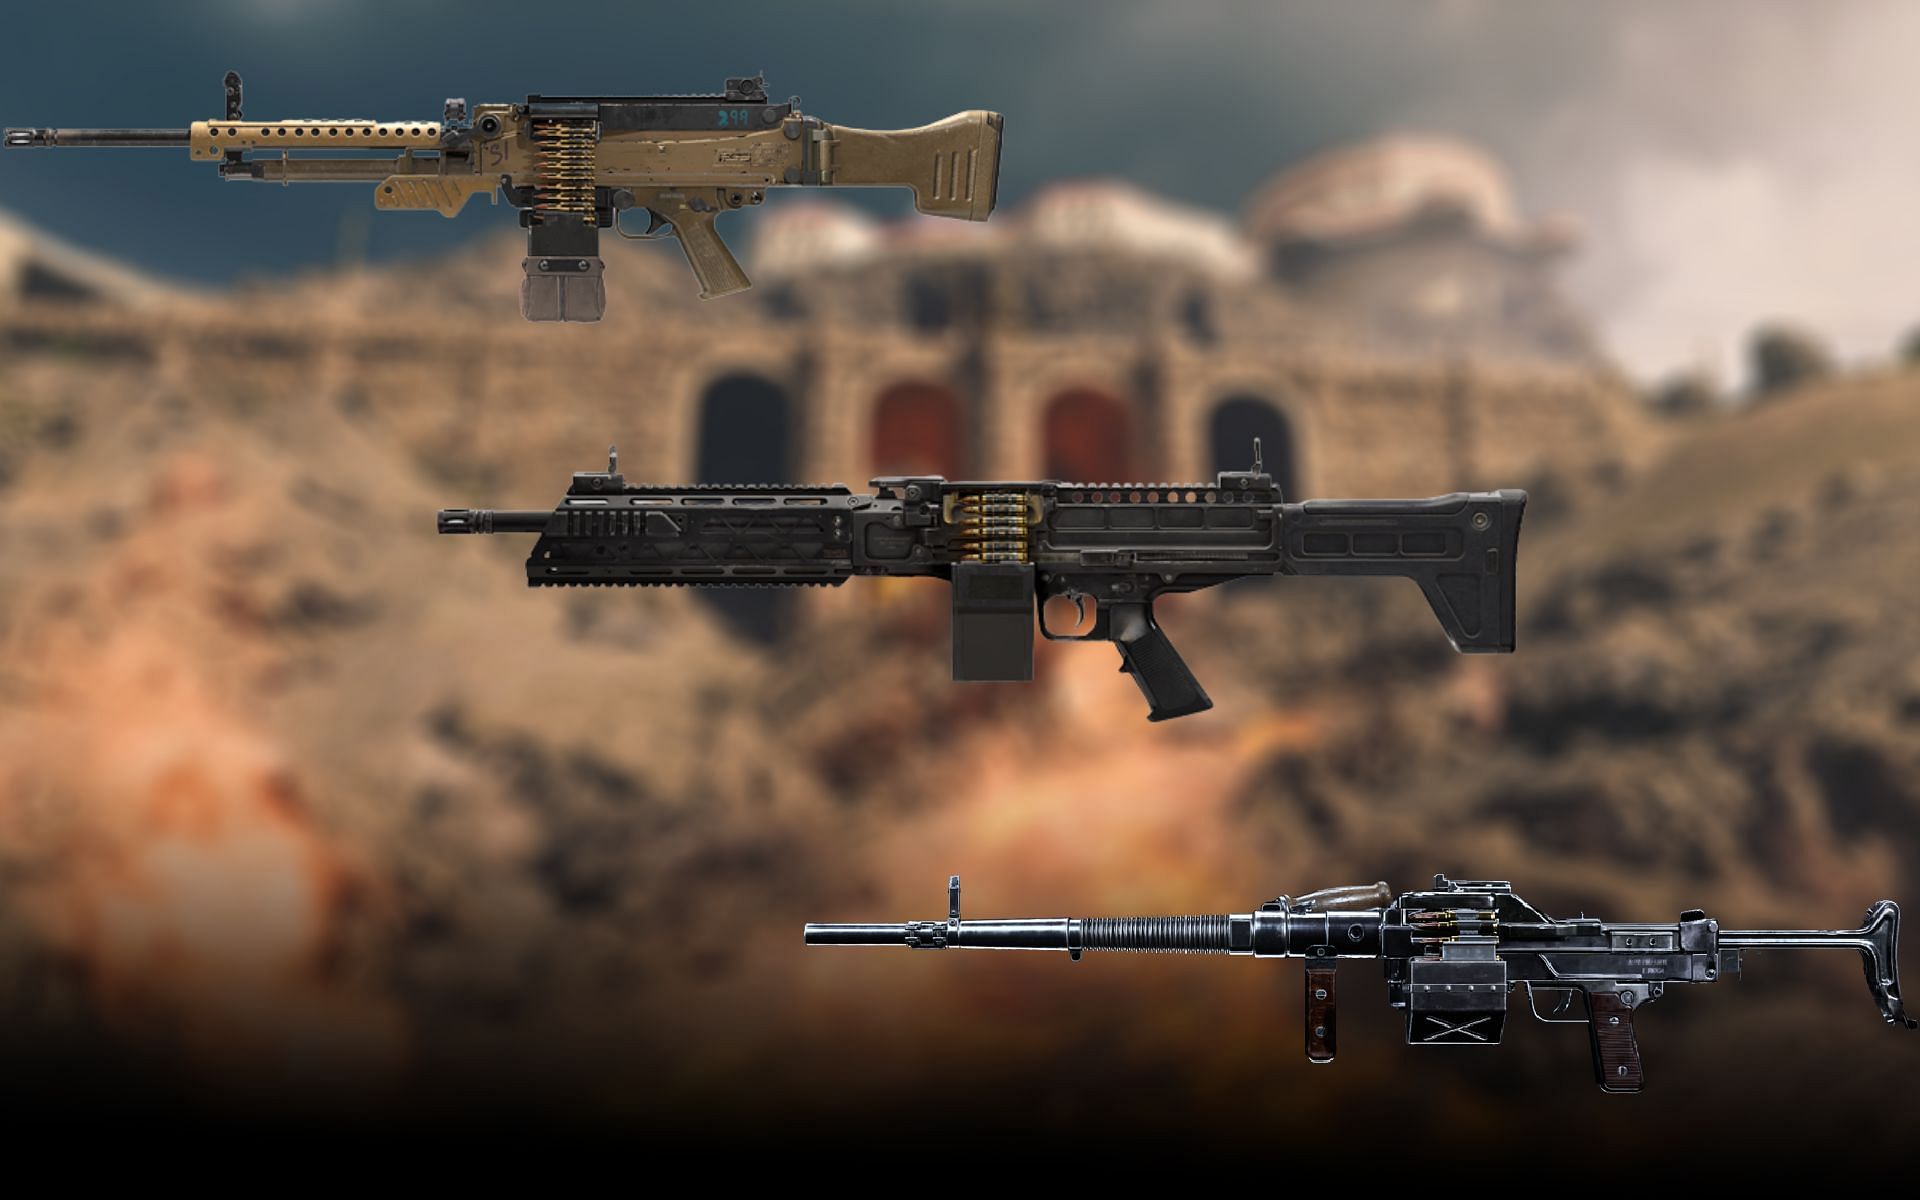 Best Meta LMG loadouts for season 6 - All LMGs ranked with the